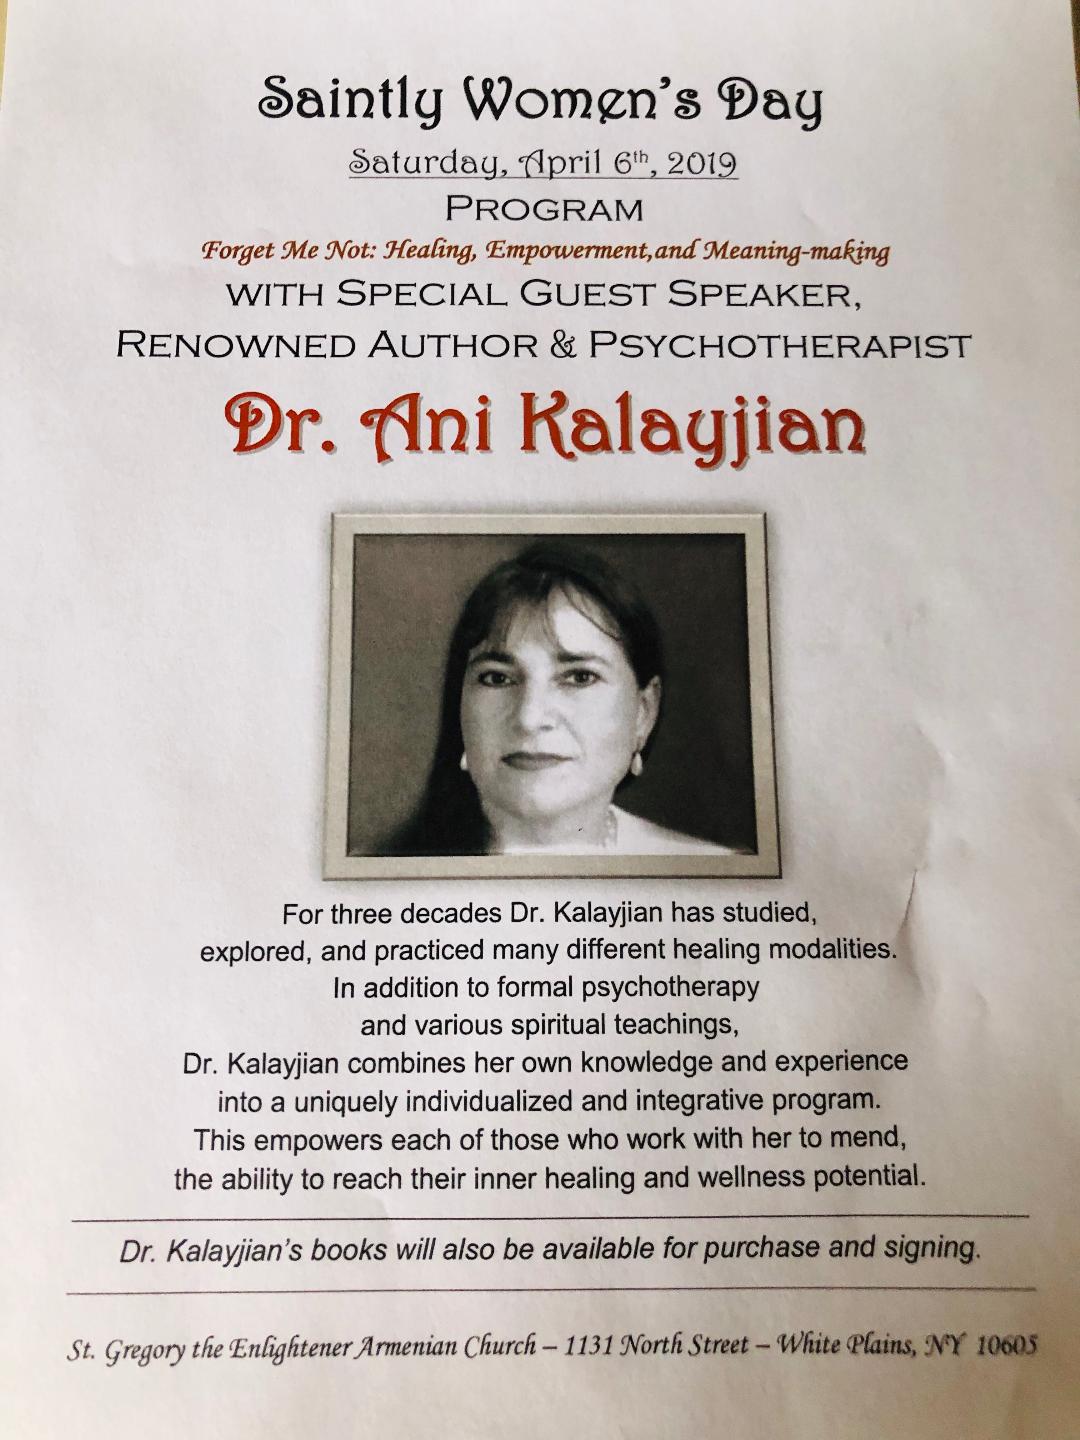 Forget Me Not: Healing, Empowerment, and Meaning-making, Dr. Kalayjian’s lecture 